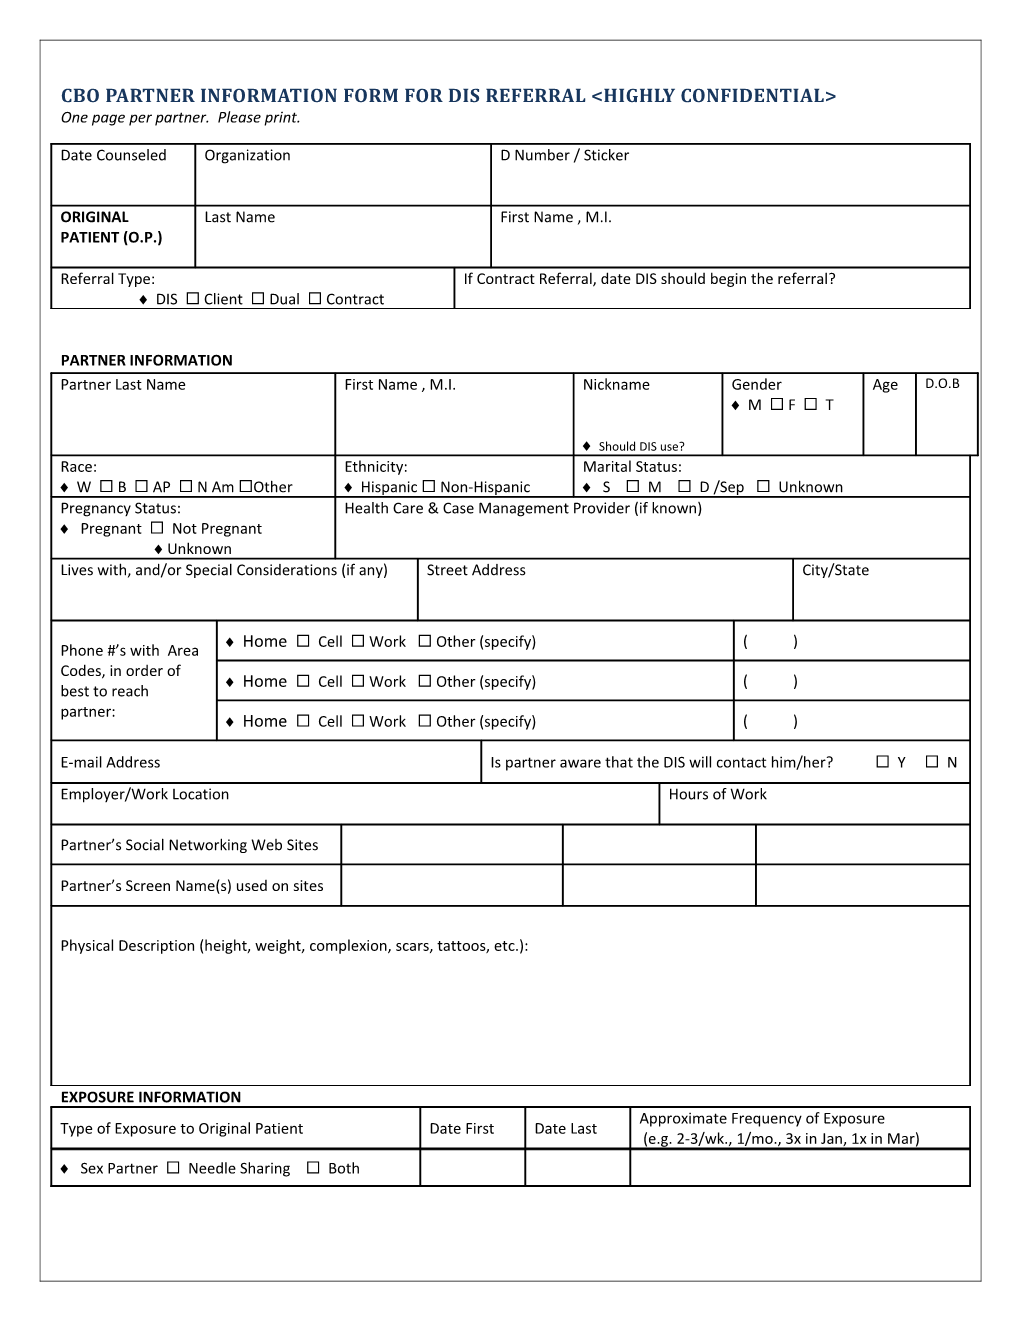 Cbo Partner Information Form for Dis Referral Highly Confidential